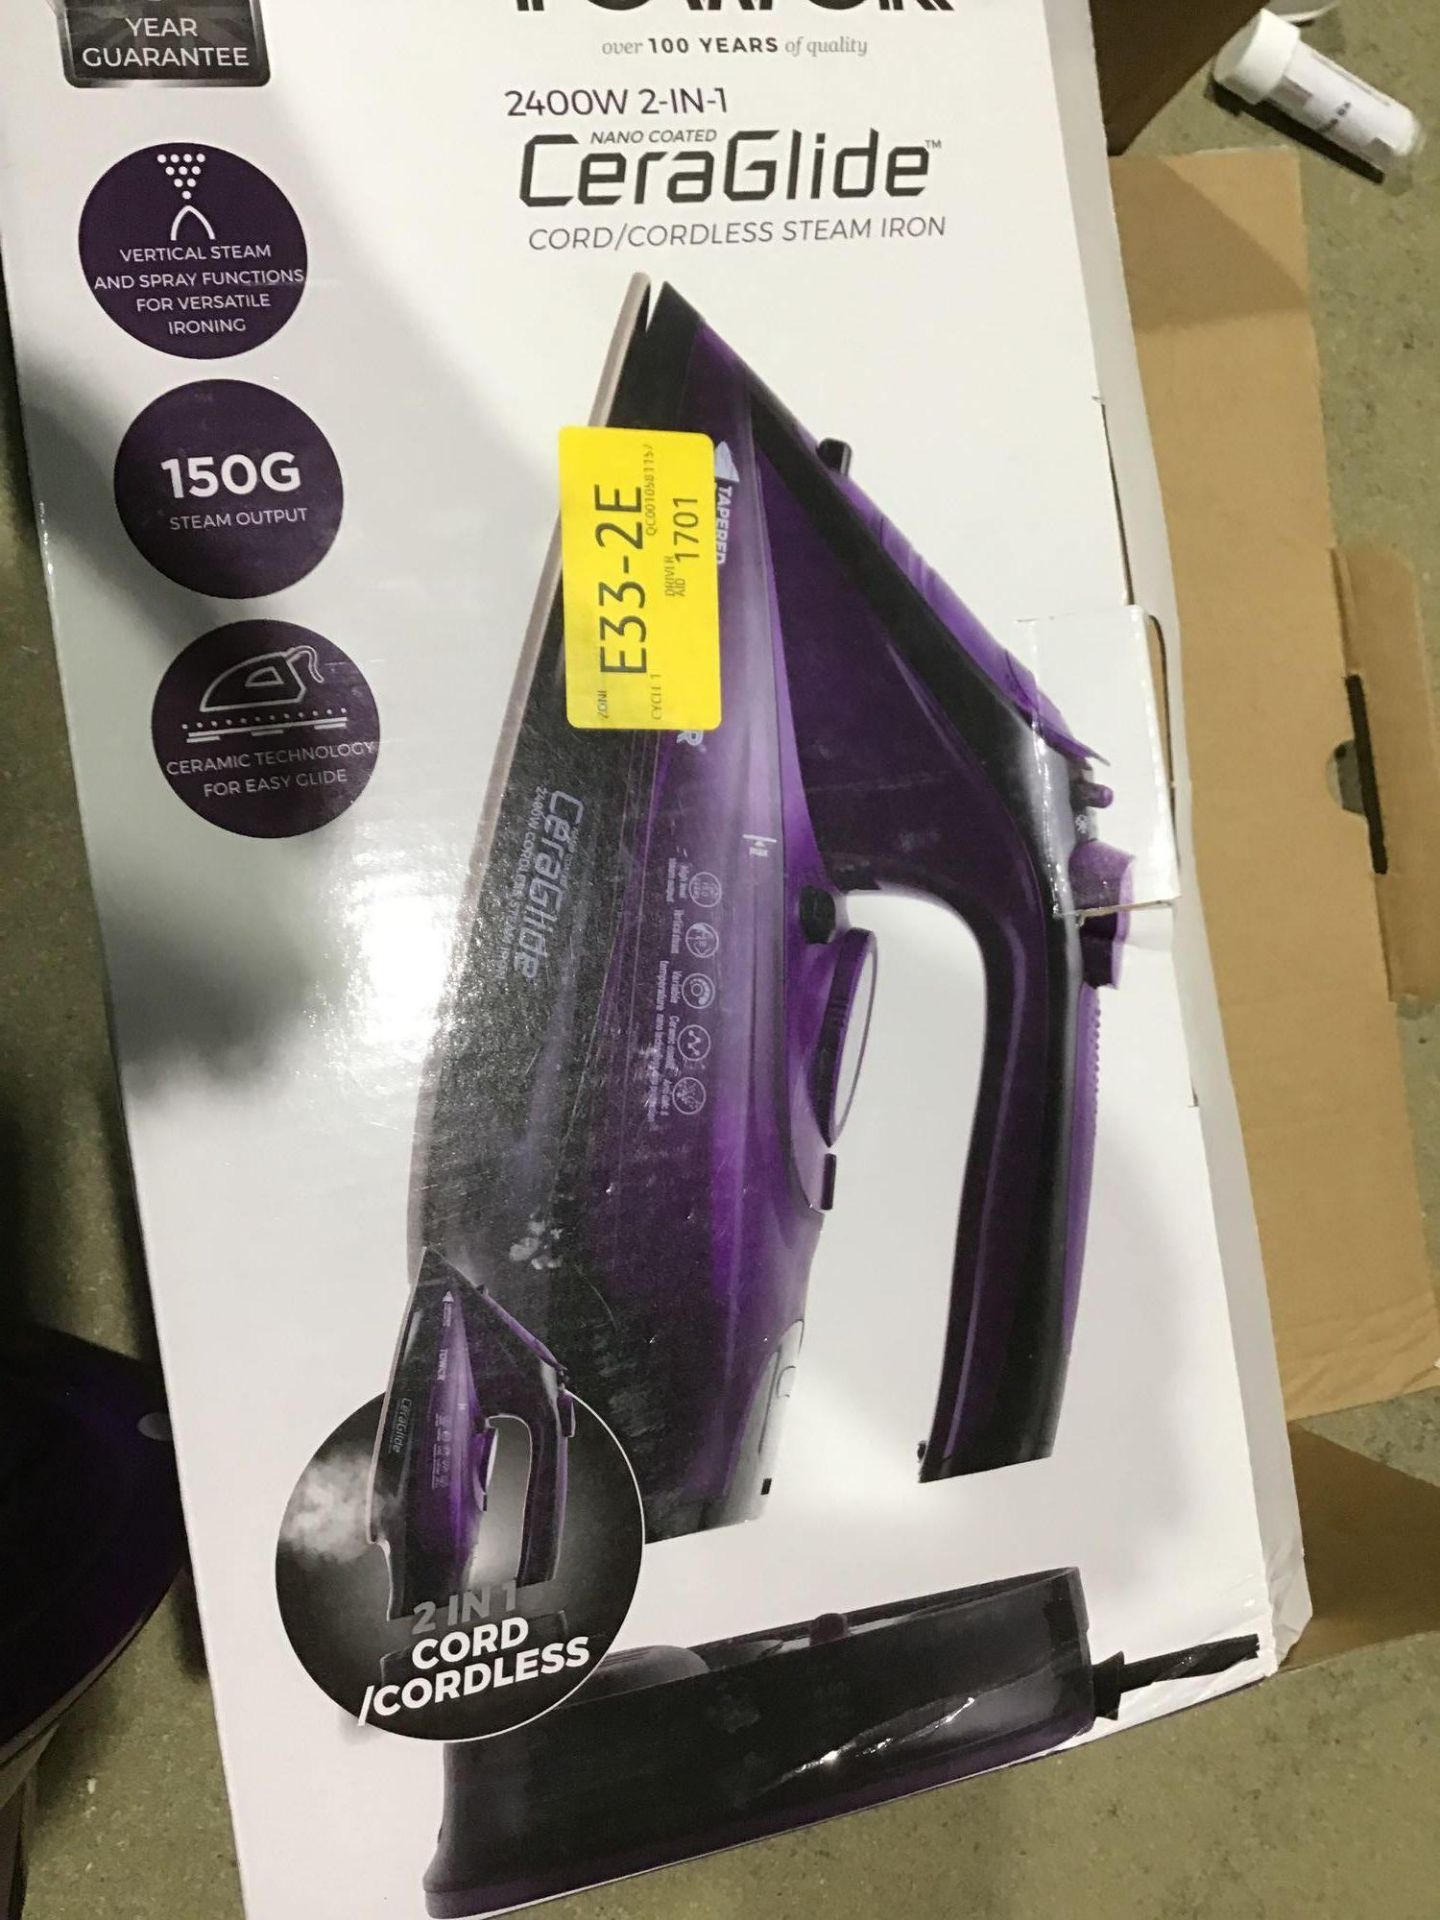 Tower T22008 CeraGlide 2-in-1 Cord or Cordless Steam Iron, 2400 W, Purple £23.75 RRP - Image 3 of 4